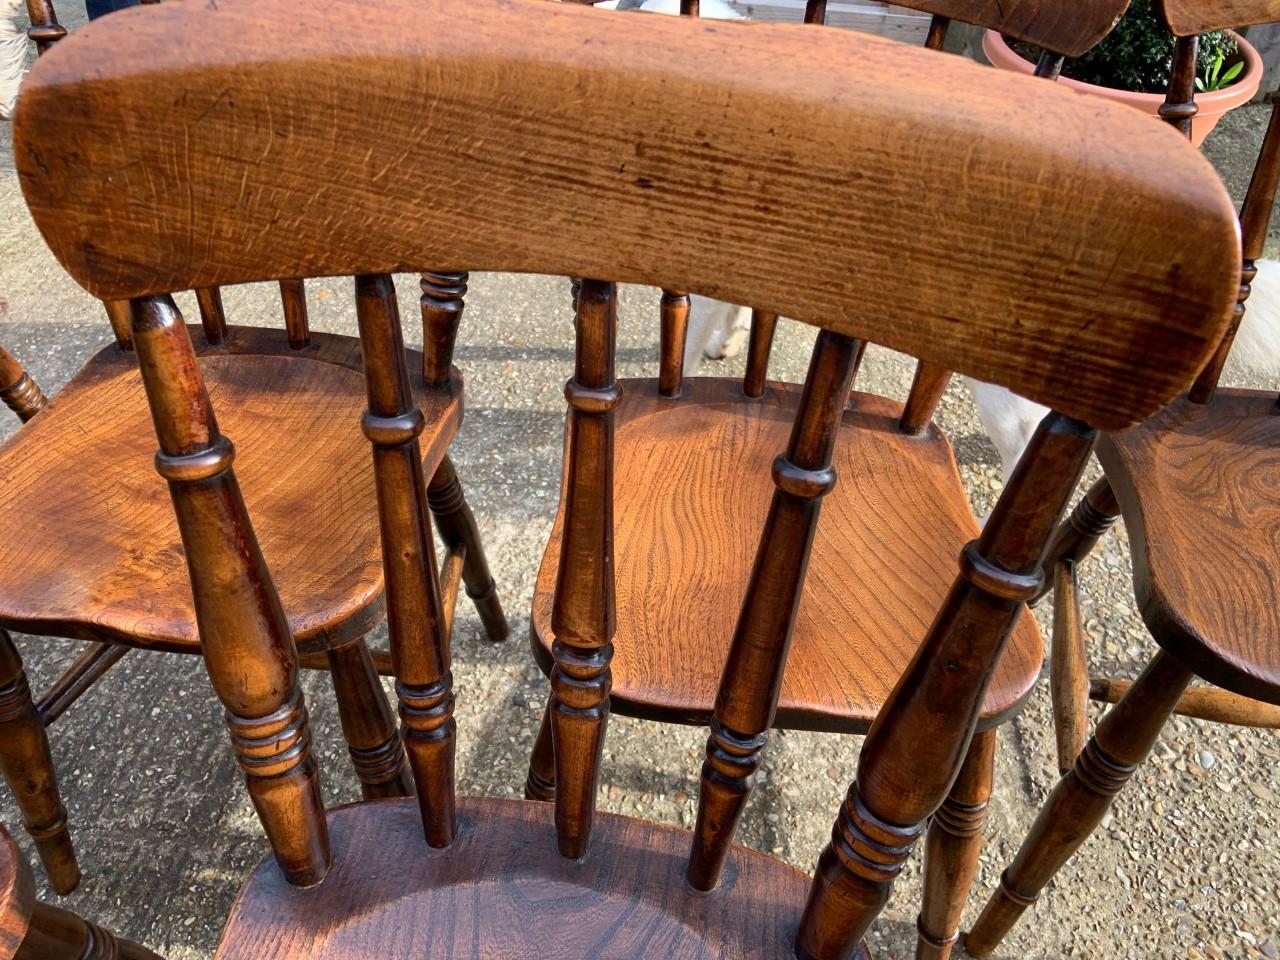 19th century true set of antique Windsor spindle back chairs. Superb grain and color. All fully restored and sturdy.
  